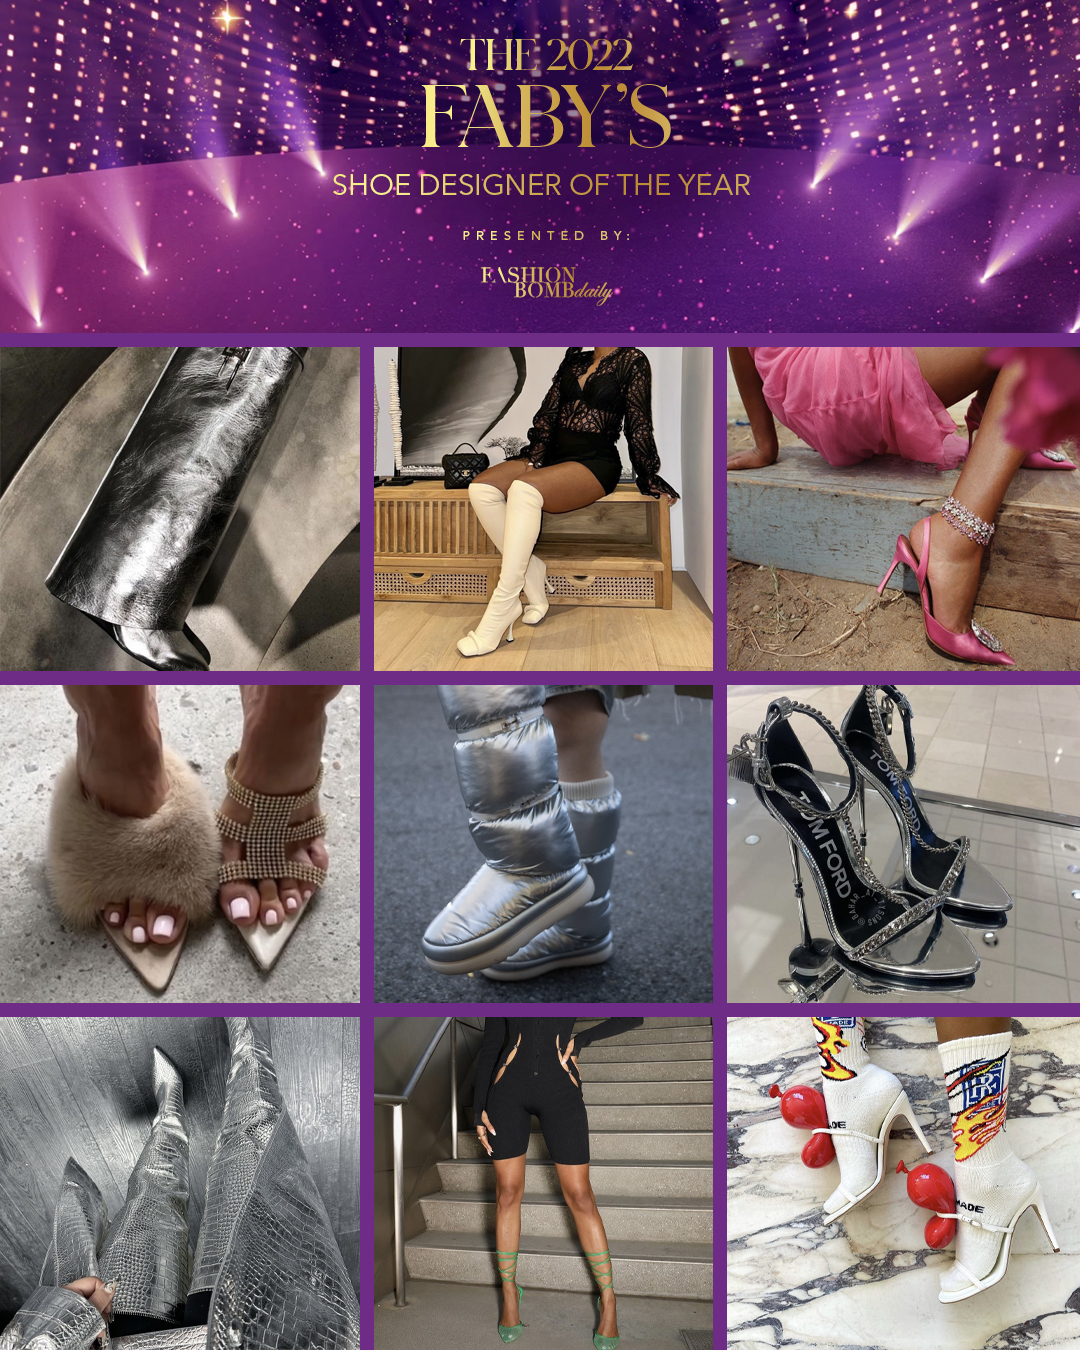 All Nomimees Shoe designer of the year